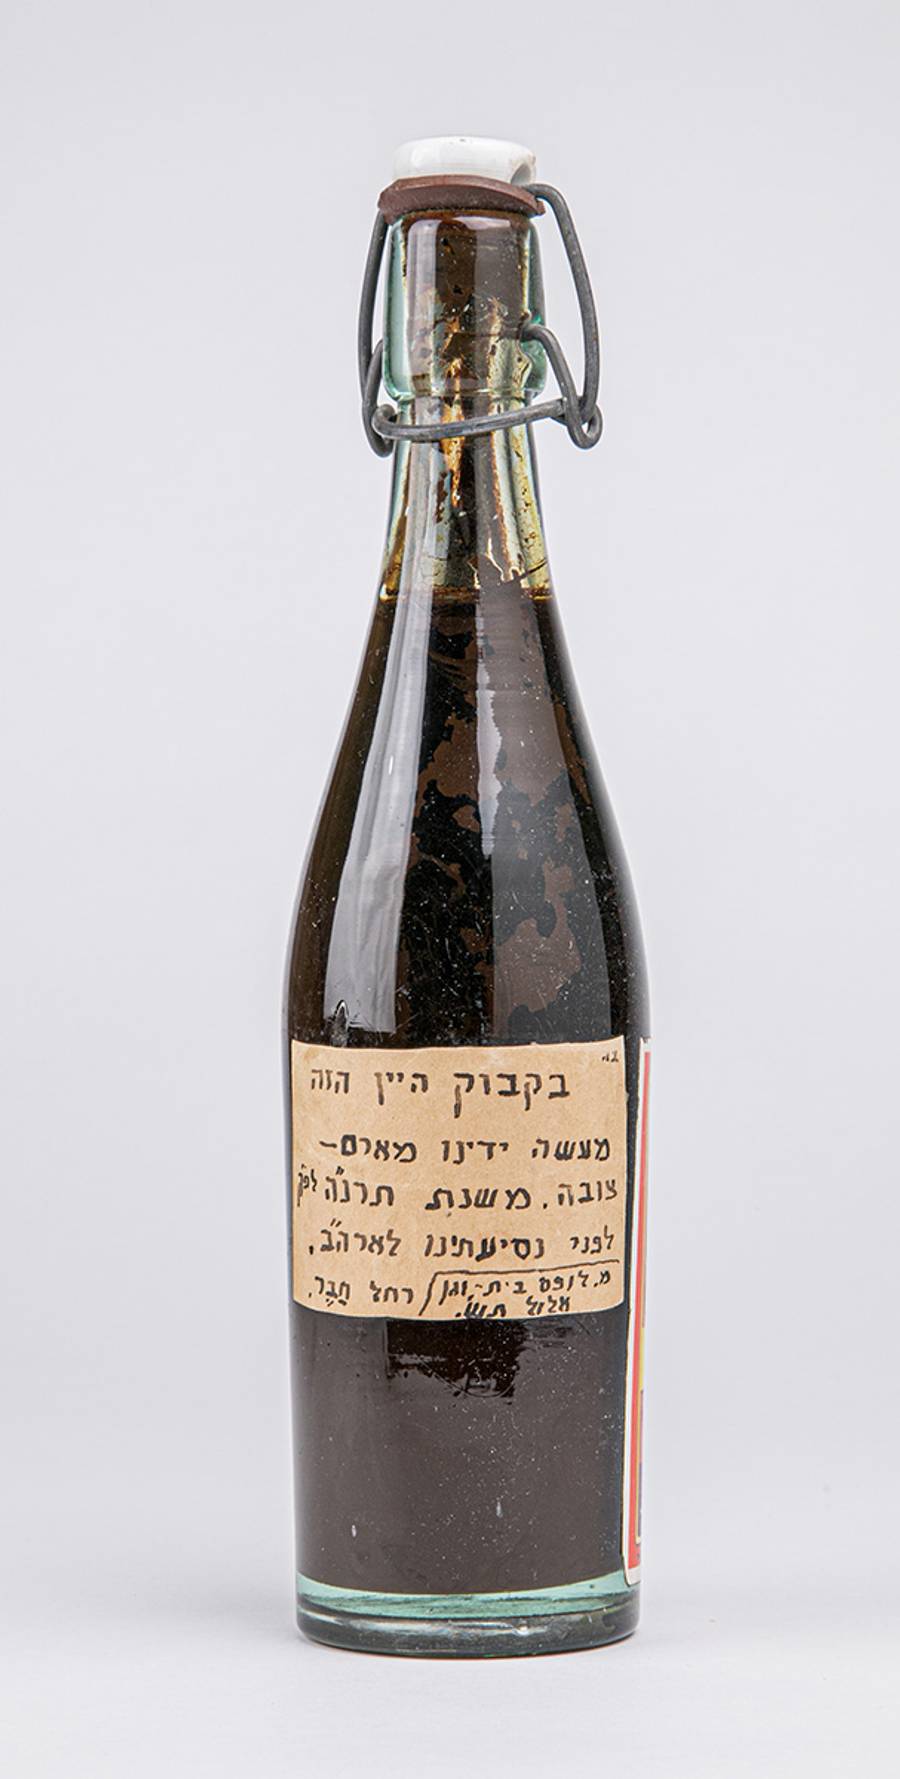 Bottle of wine made in Aleppo in the late 19th century by Rachel Haber and her family before they emigrated to the United States. They planned to open it when they arrived.